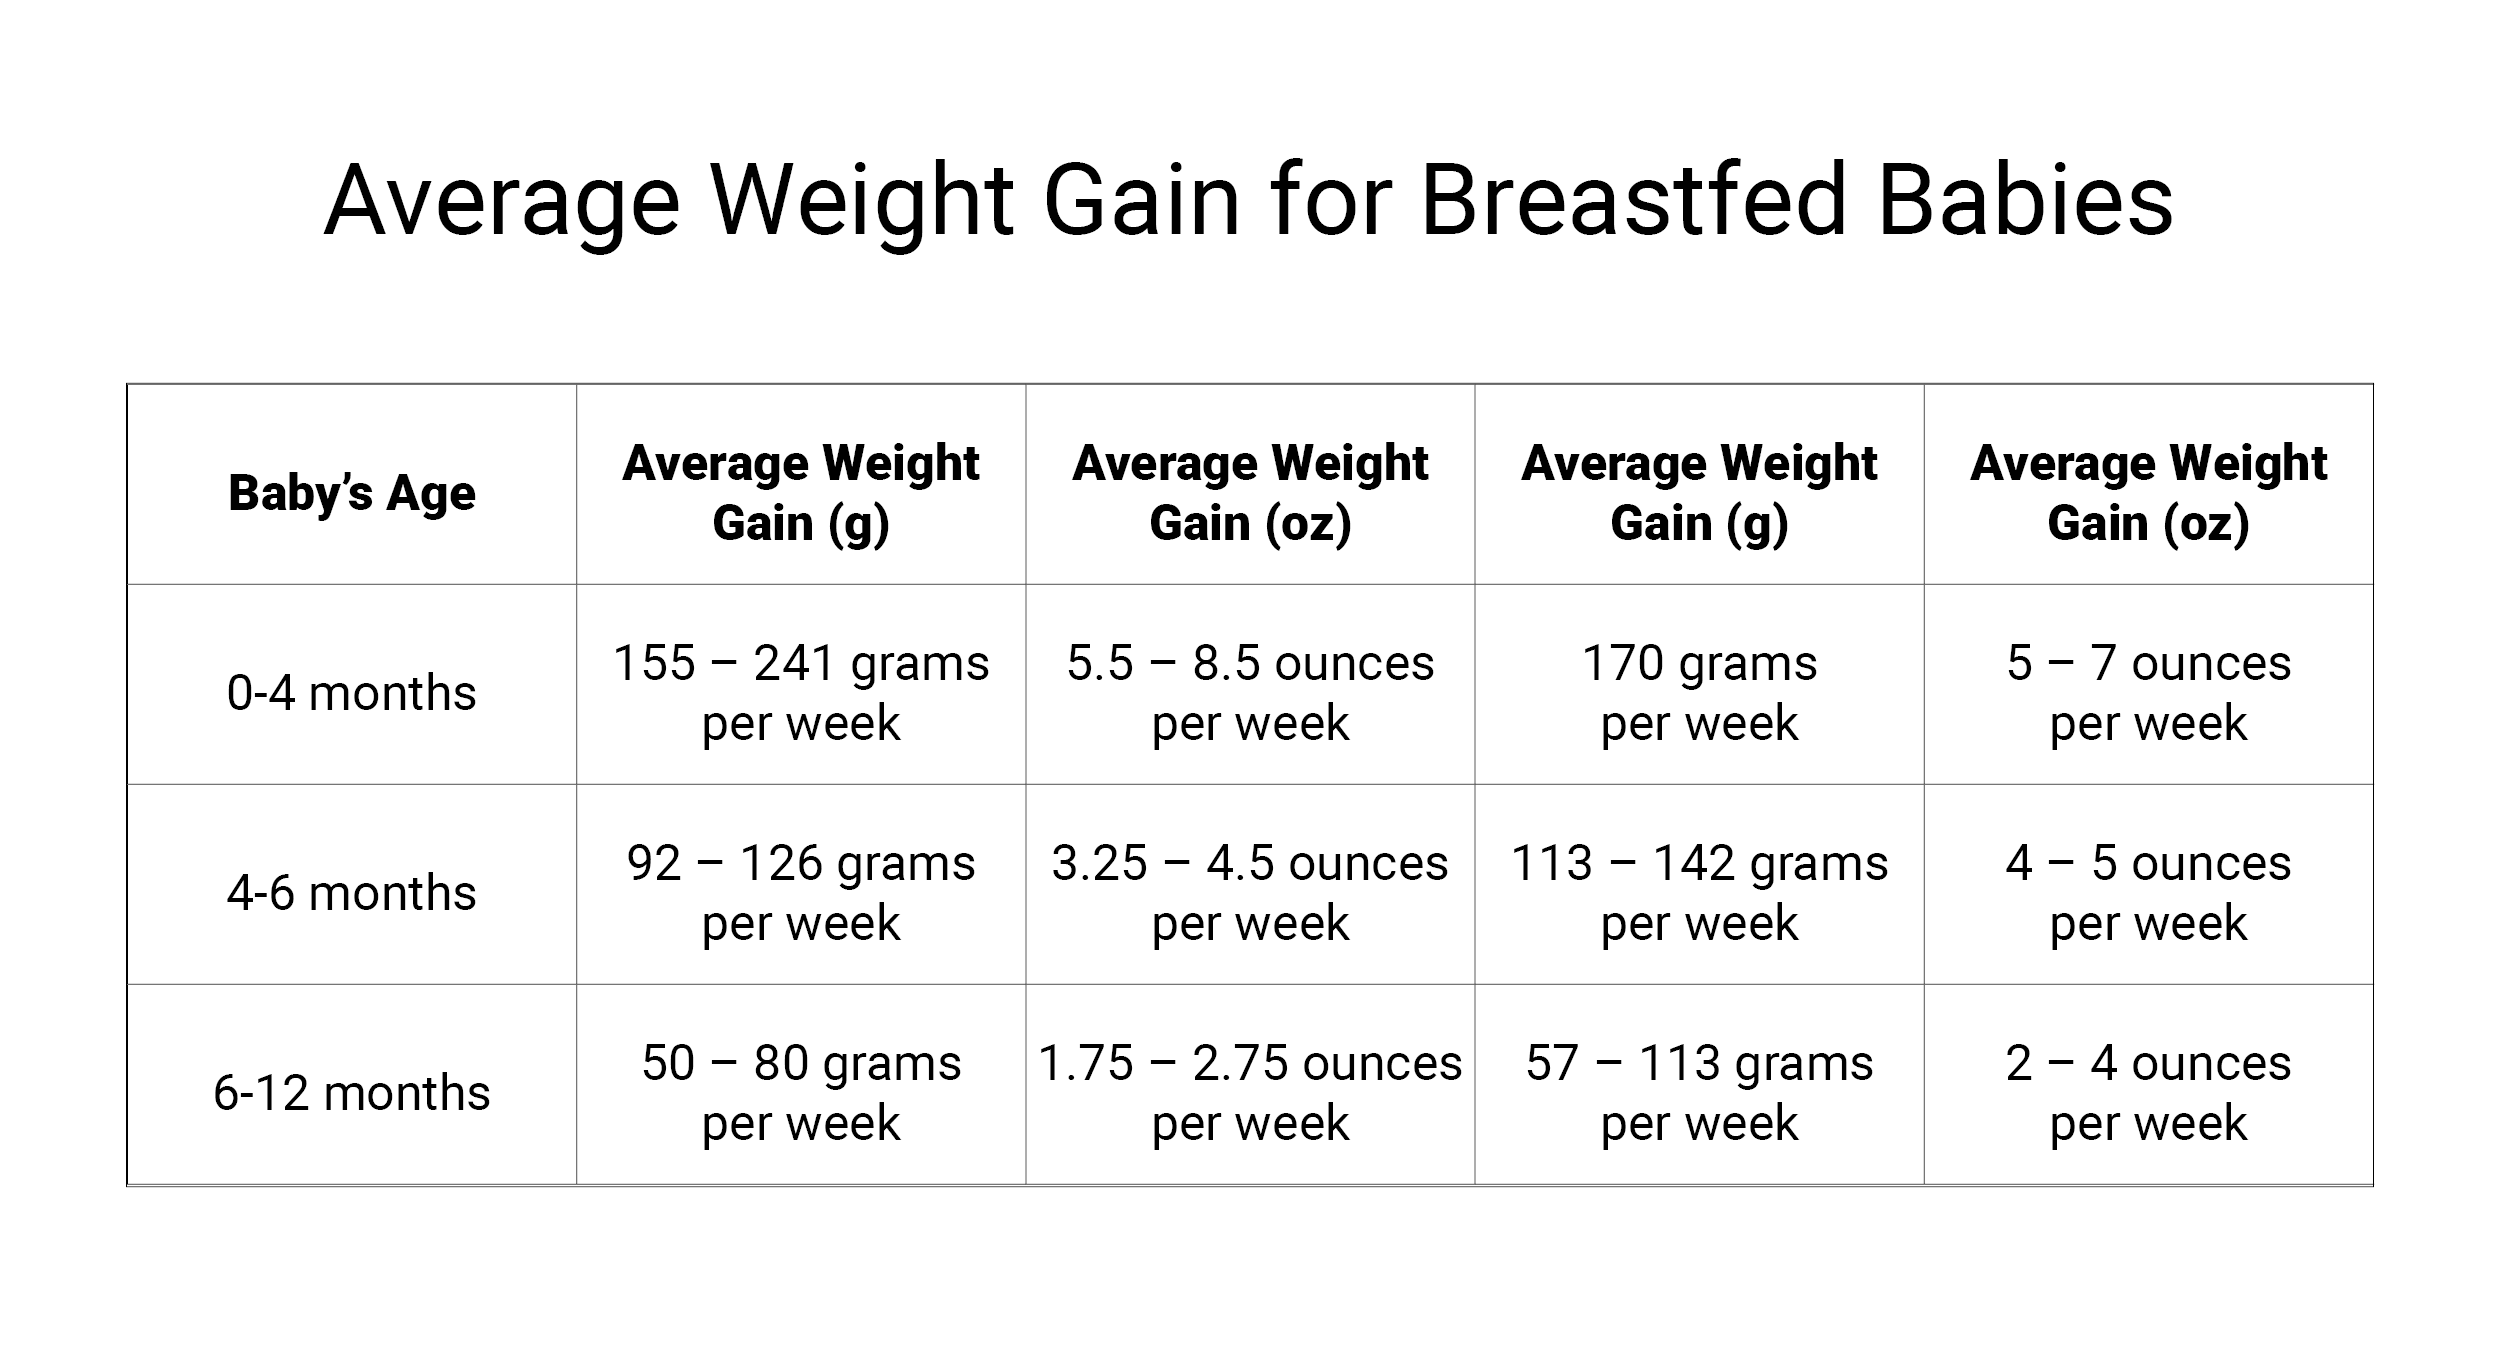 https://www.marsden-weighing.co.uk/storage/images/general/Average-Weight-Gain-for-Breastfed-Babies.png